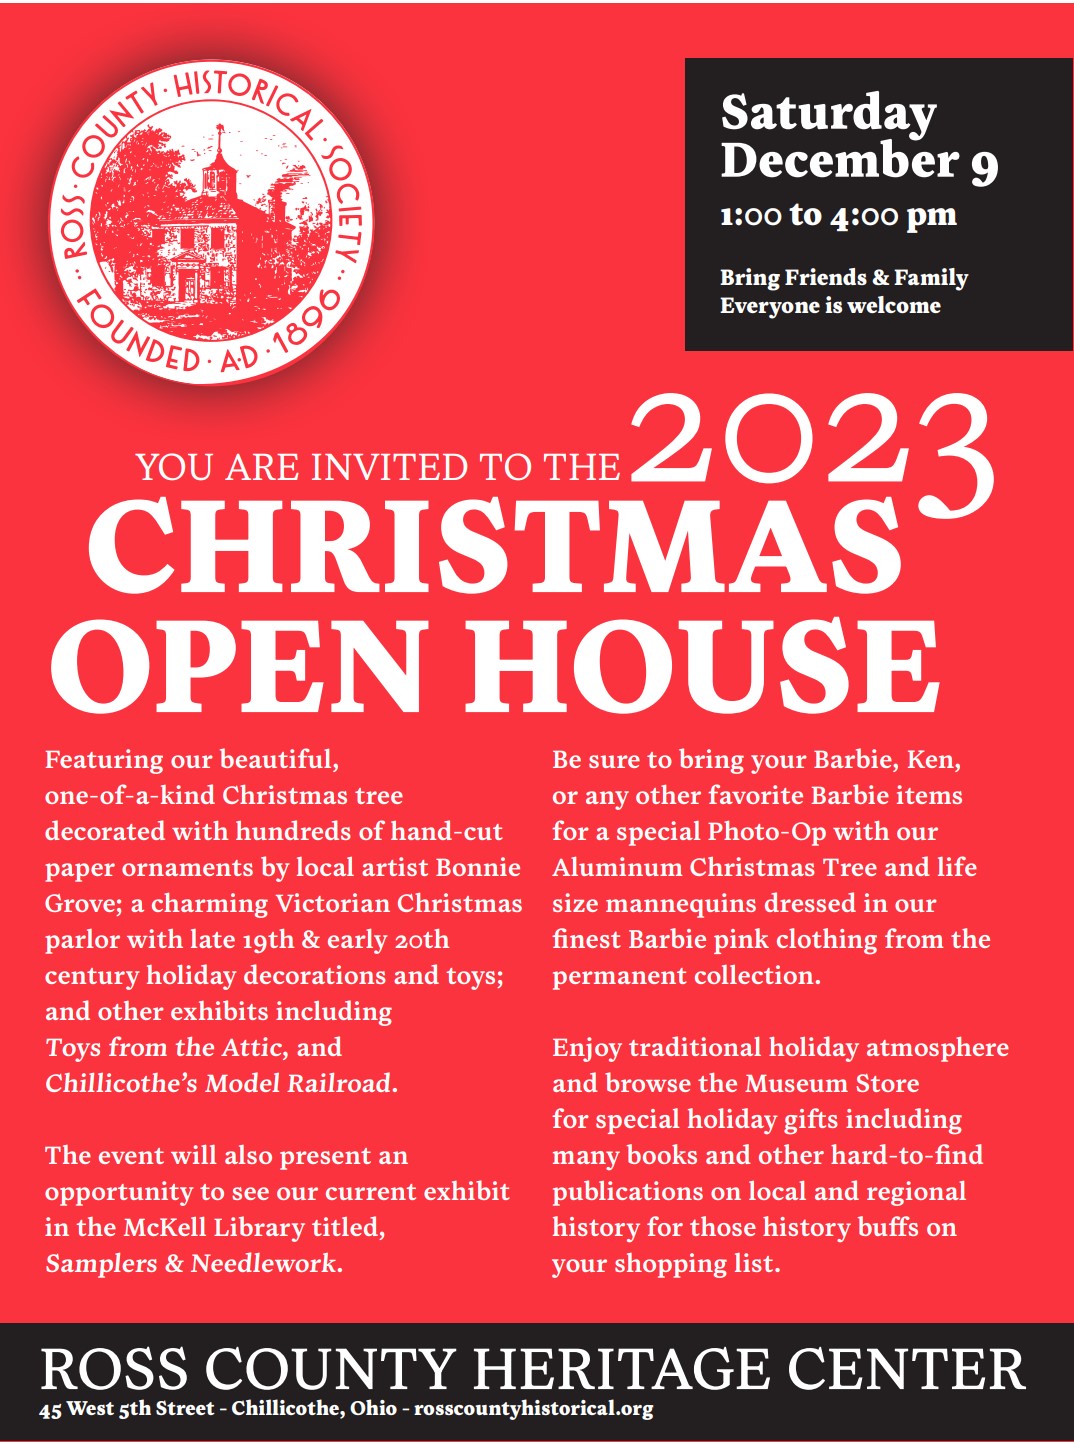 A flyer for a Christmas Open House.